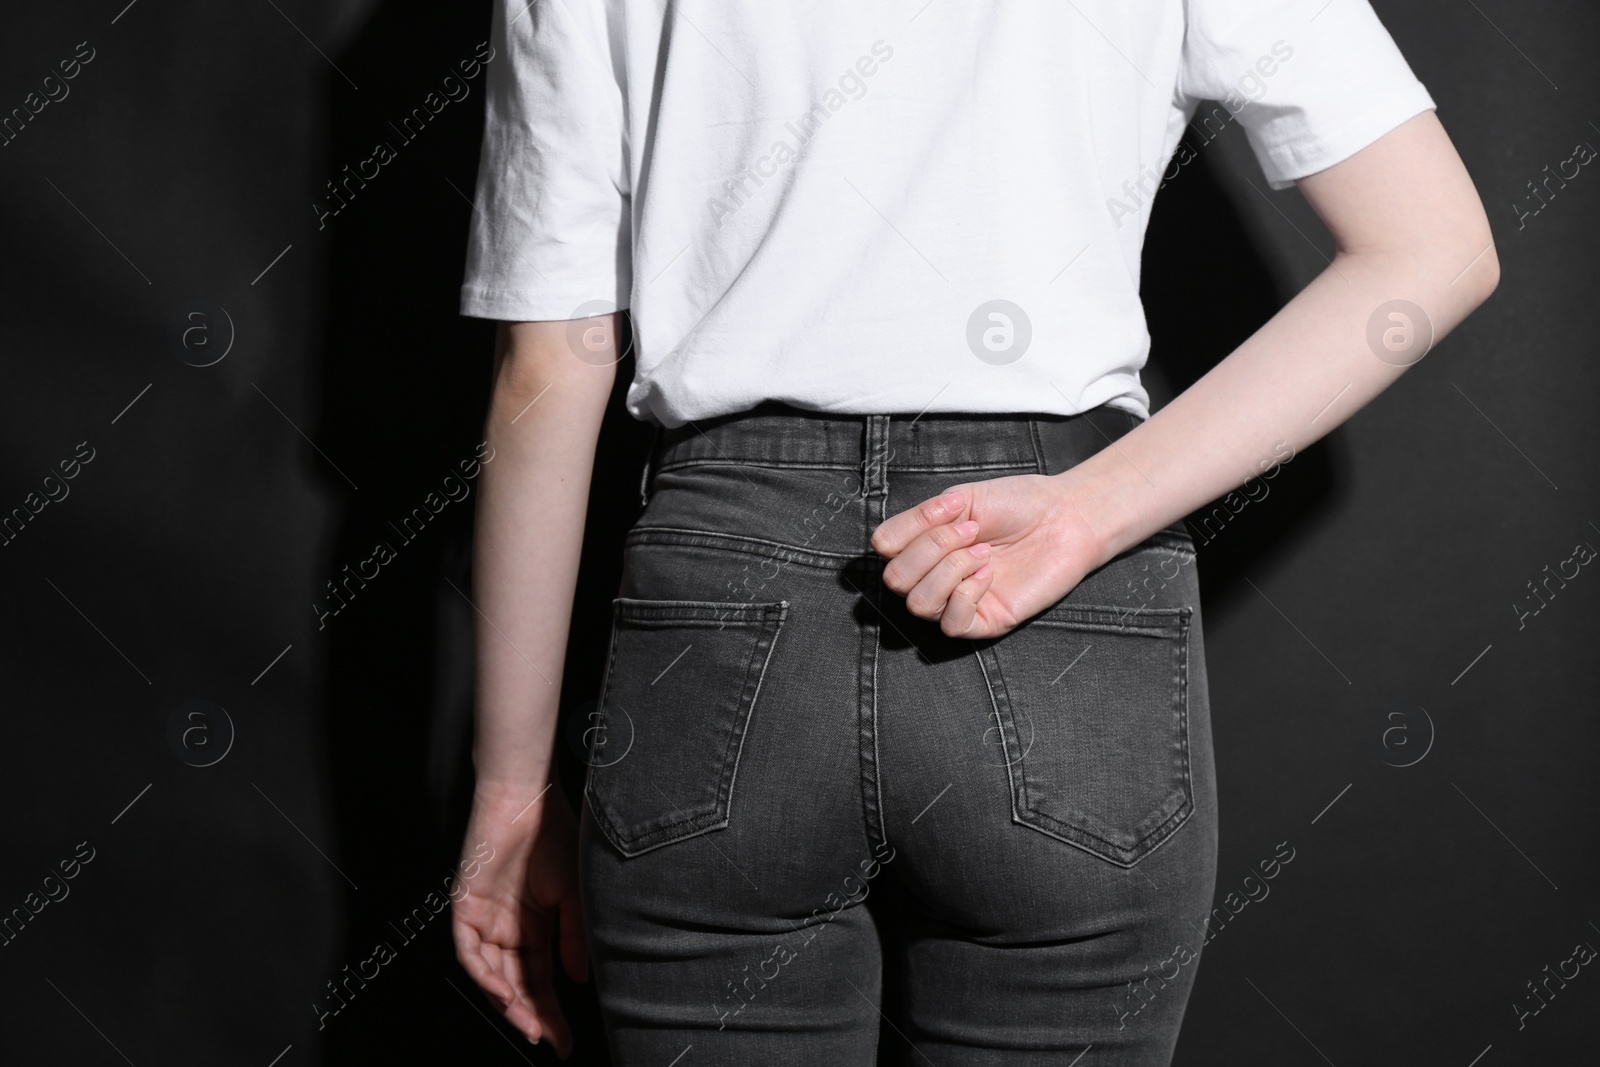 Photo of SOS gesture. Woman showing signal for help behind her back on black background, back view